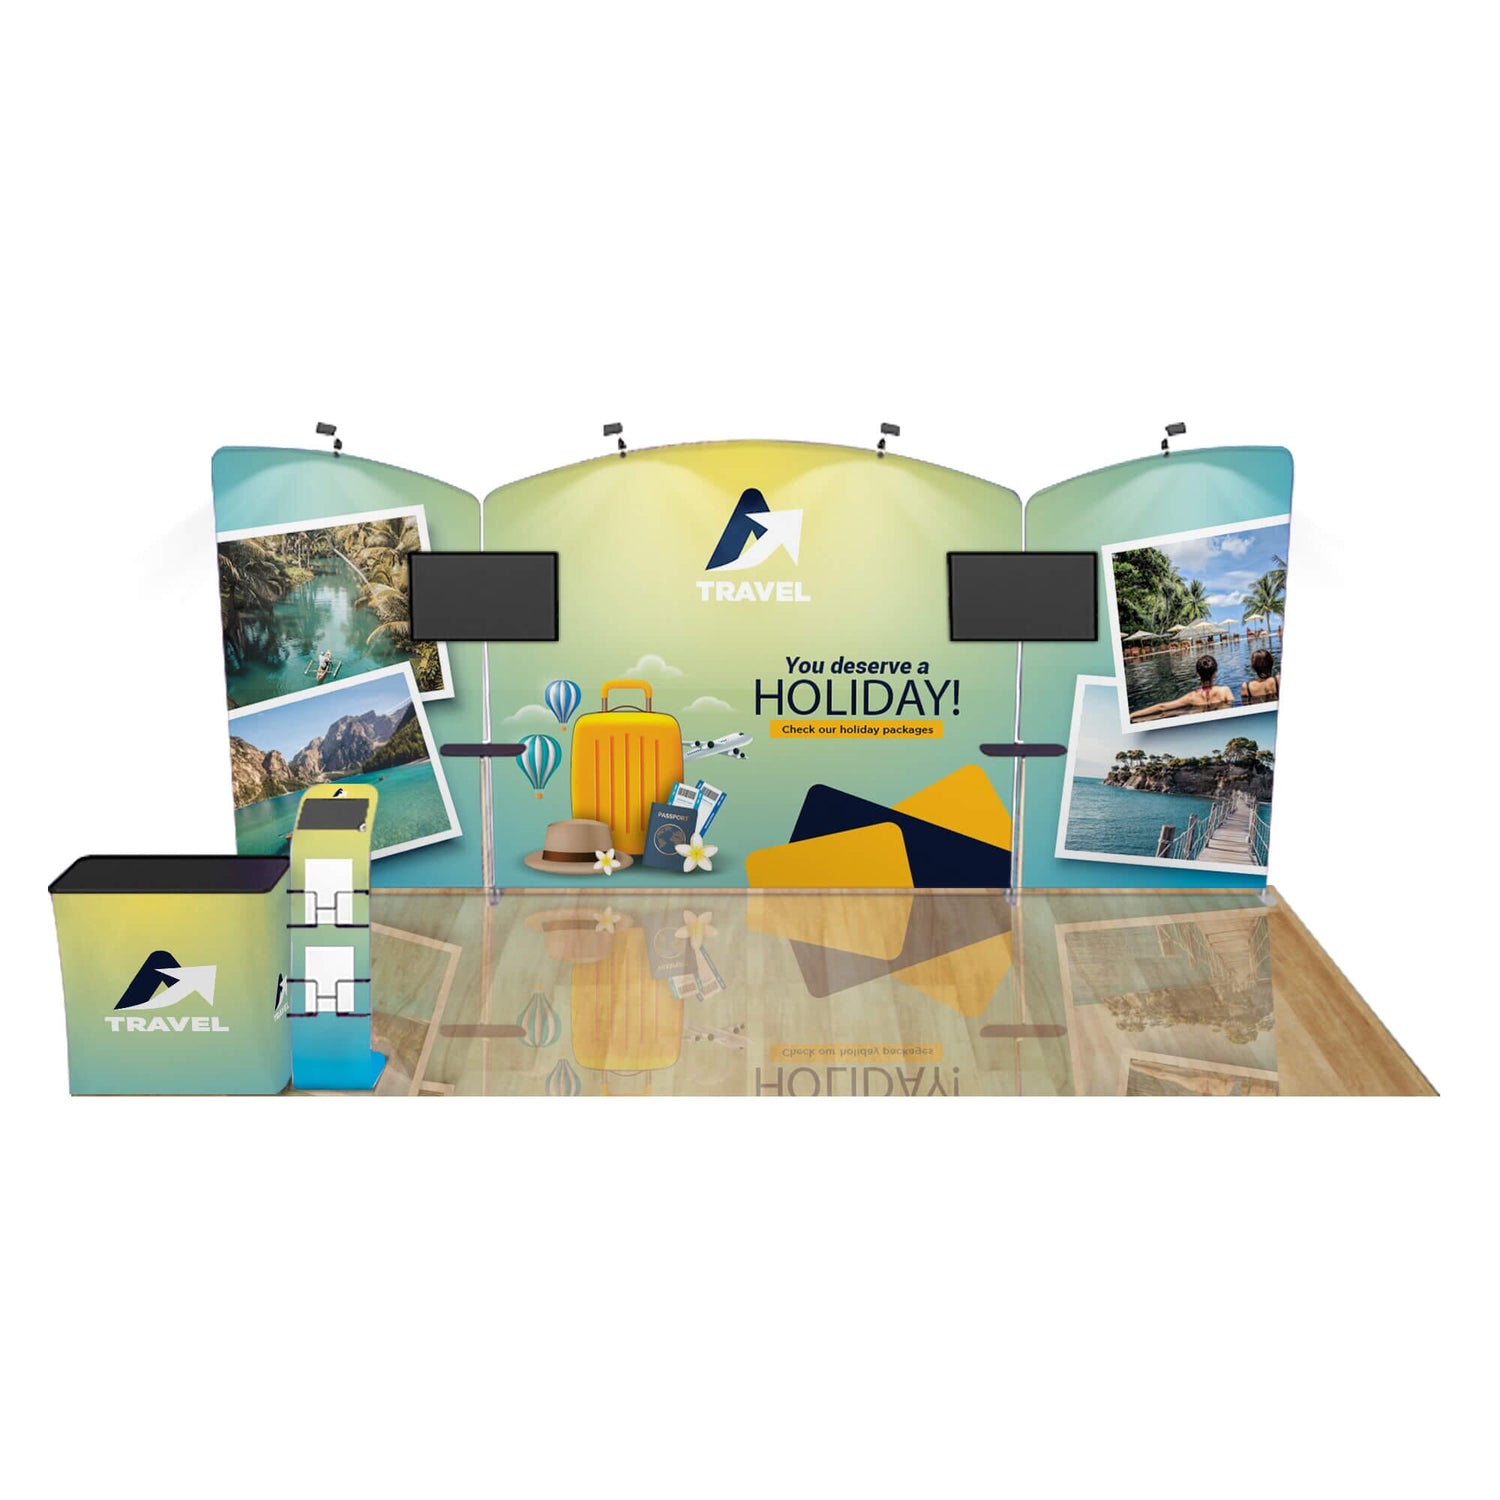 10x20 Trade Show Booth Display - Fanfare Silver Package 